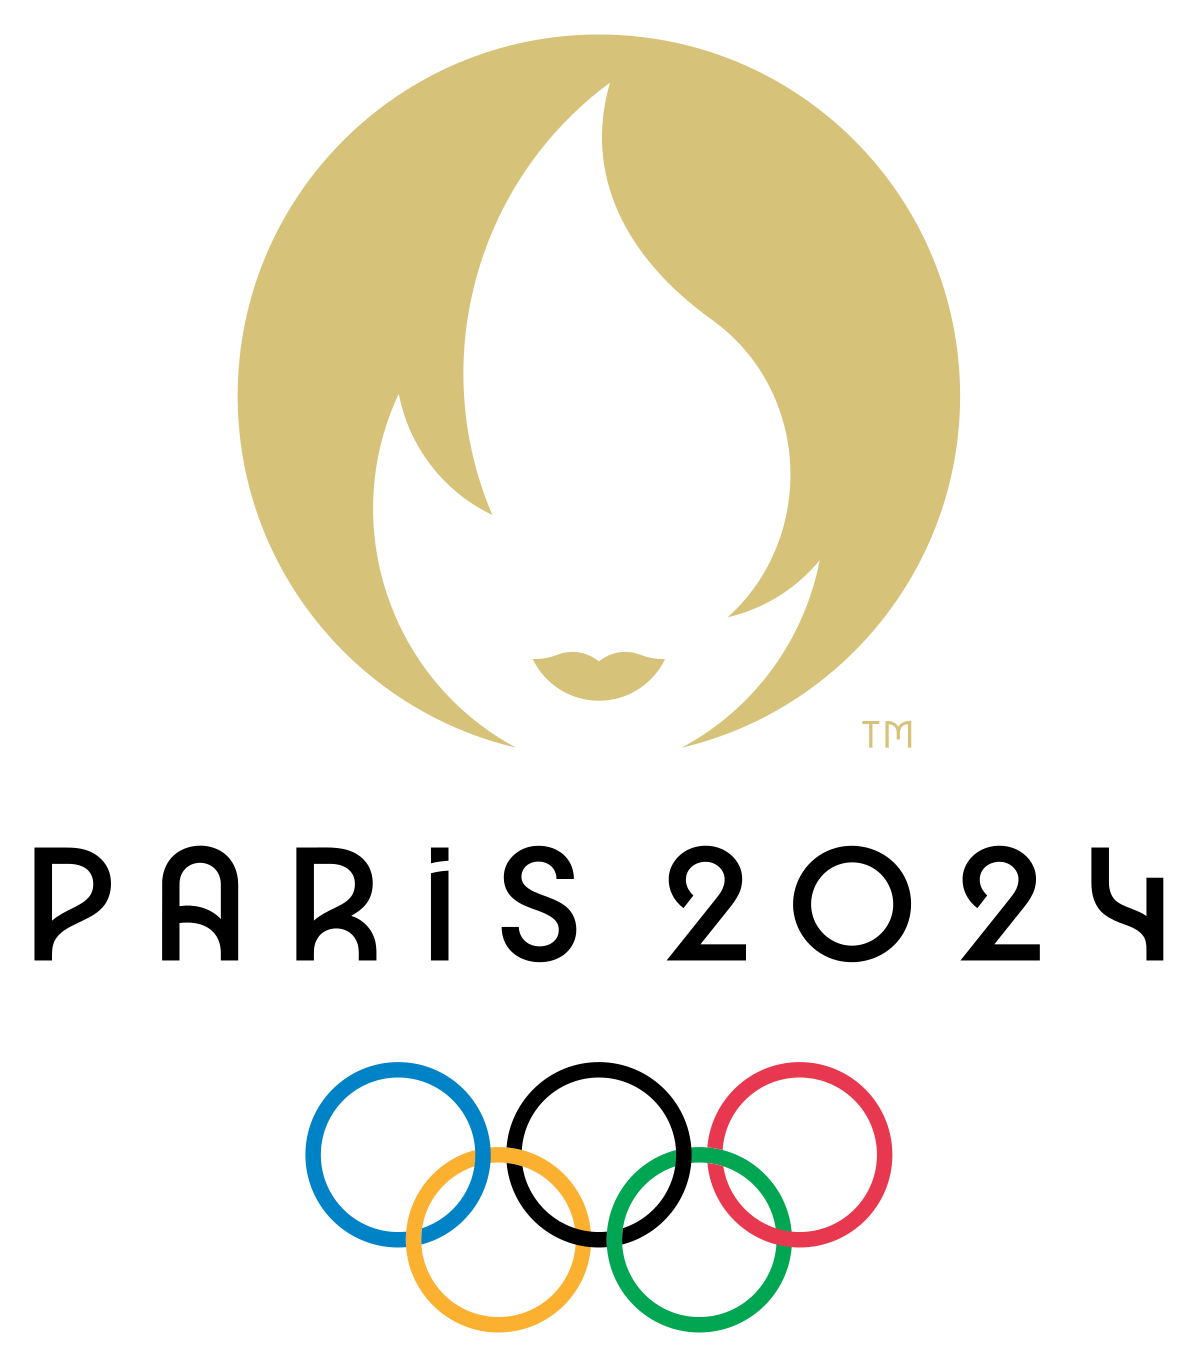 An organisation of Olympic sports federations on Friday said the decision by World Athletics to award prize money to gold medallists